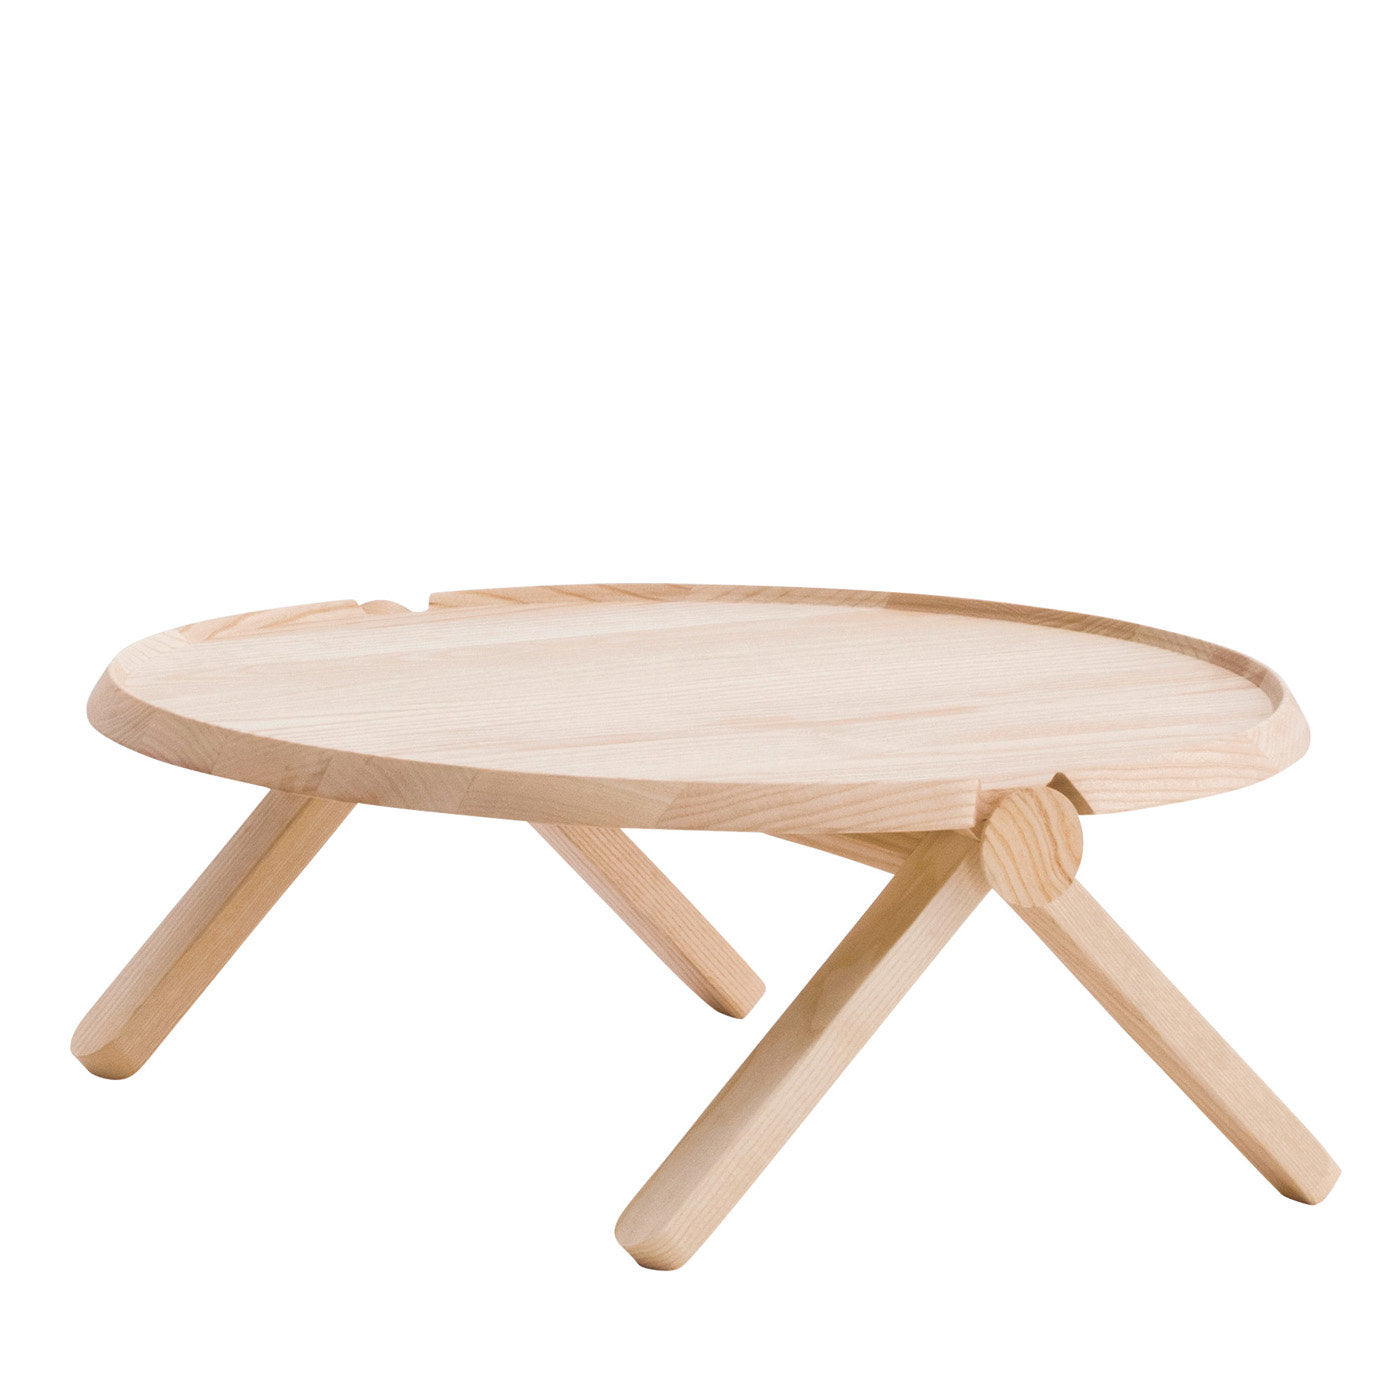 Ash Lilliput Coffee Table by Studioventotto - Main view